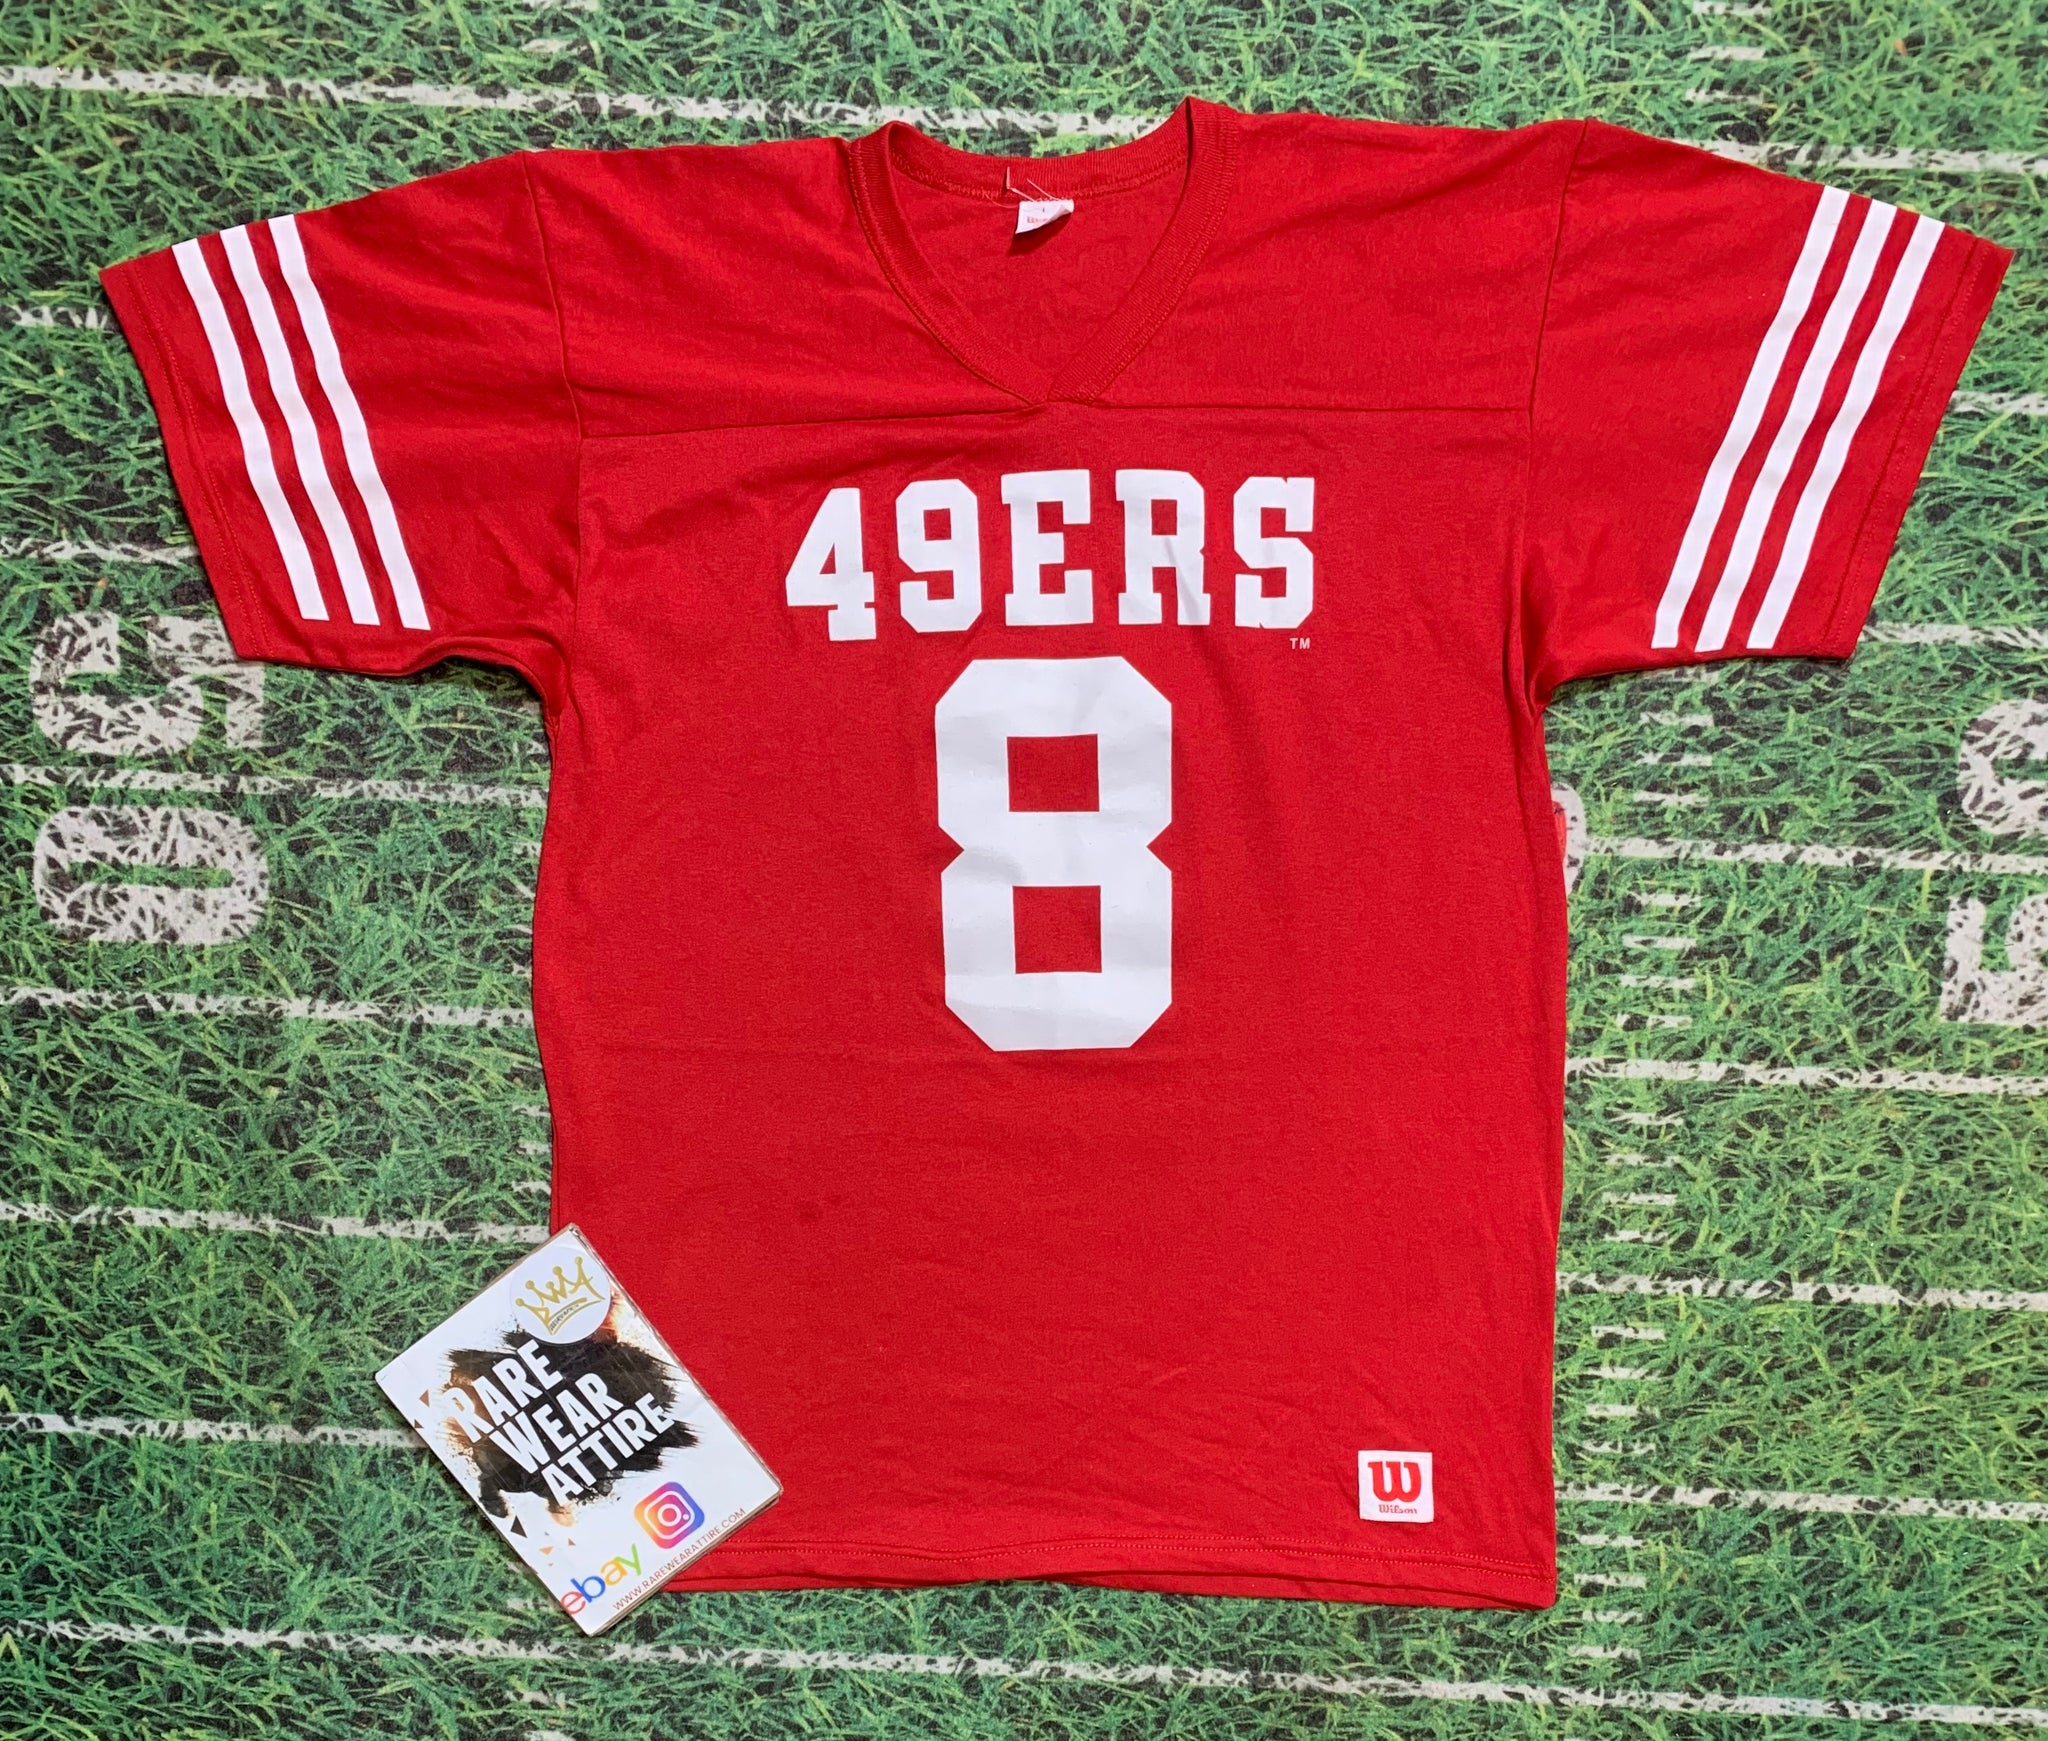 steve young jersey